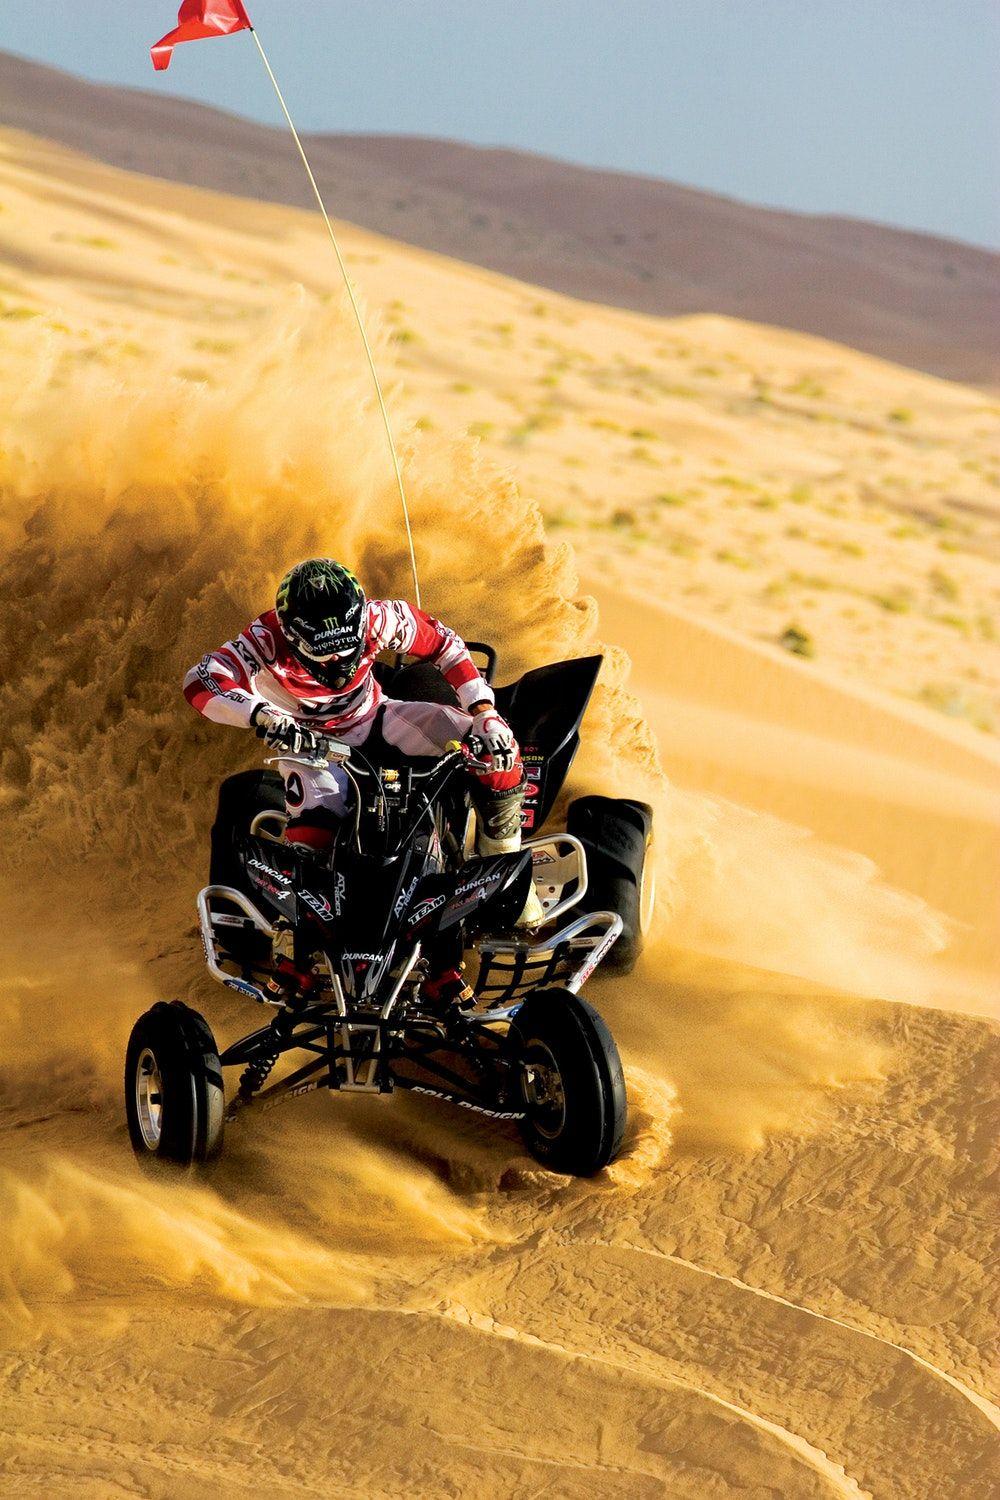 Quadbike Picture [HQ]. Download Free Image